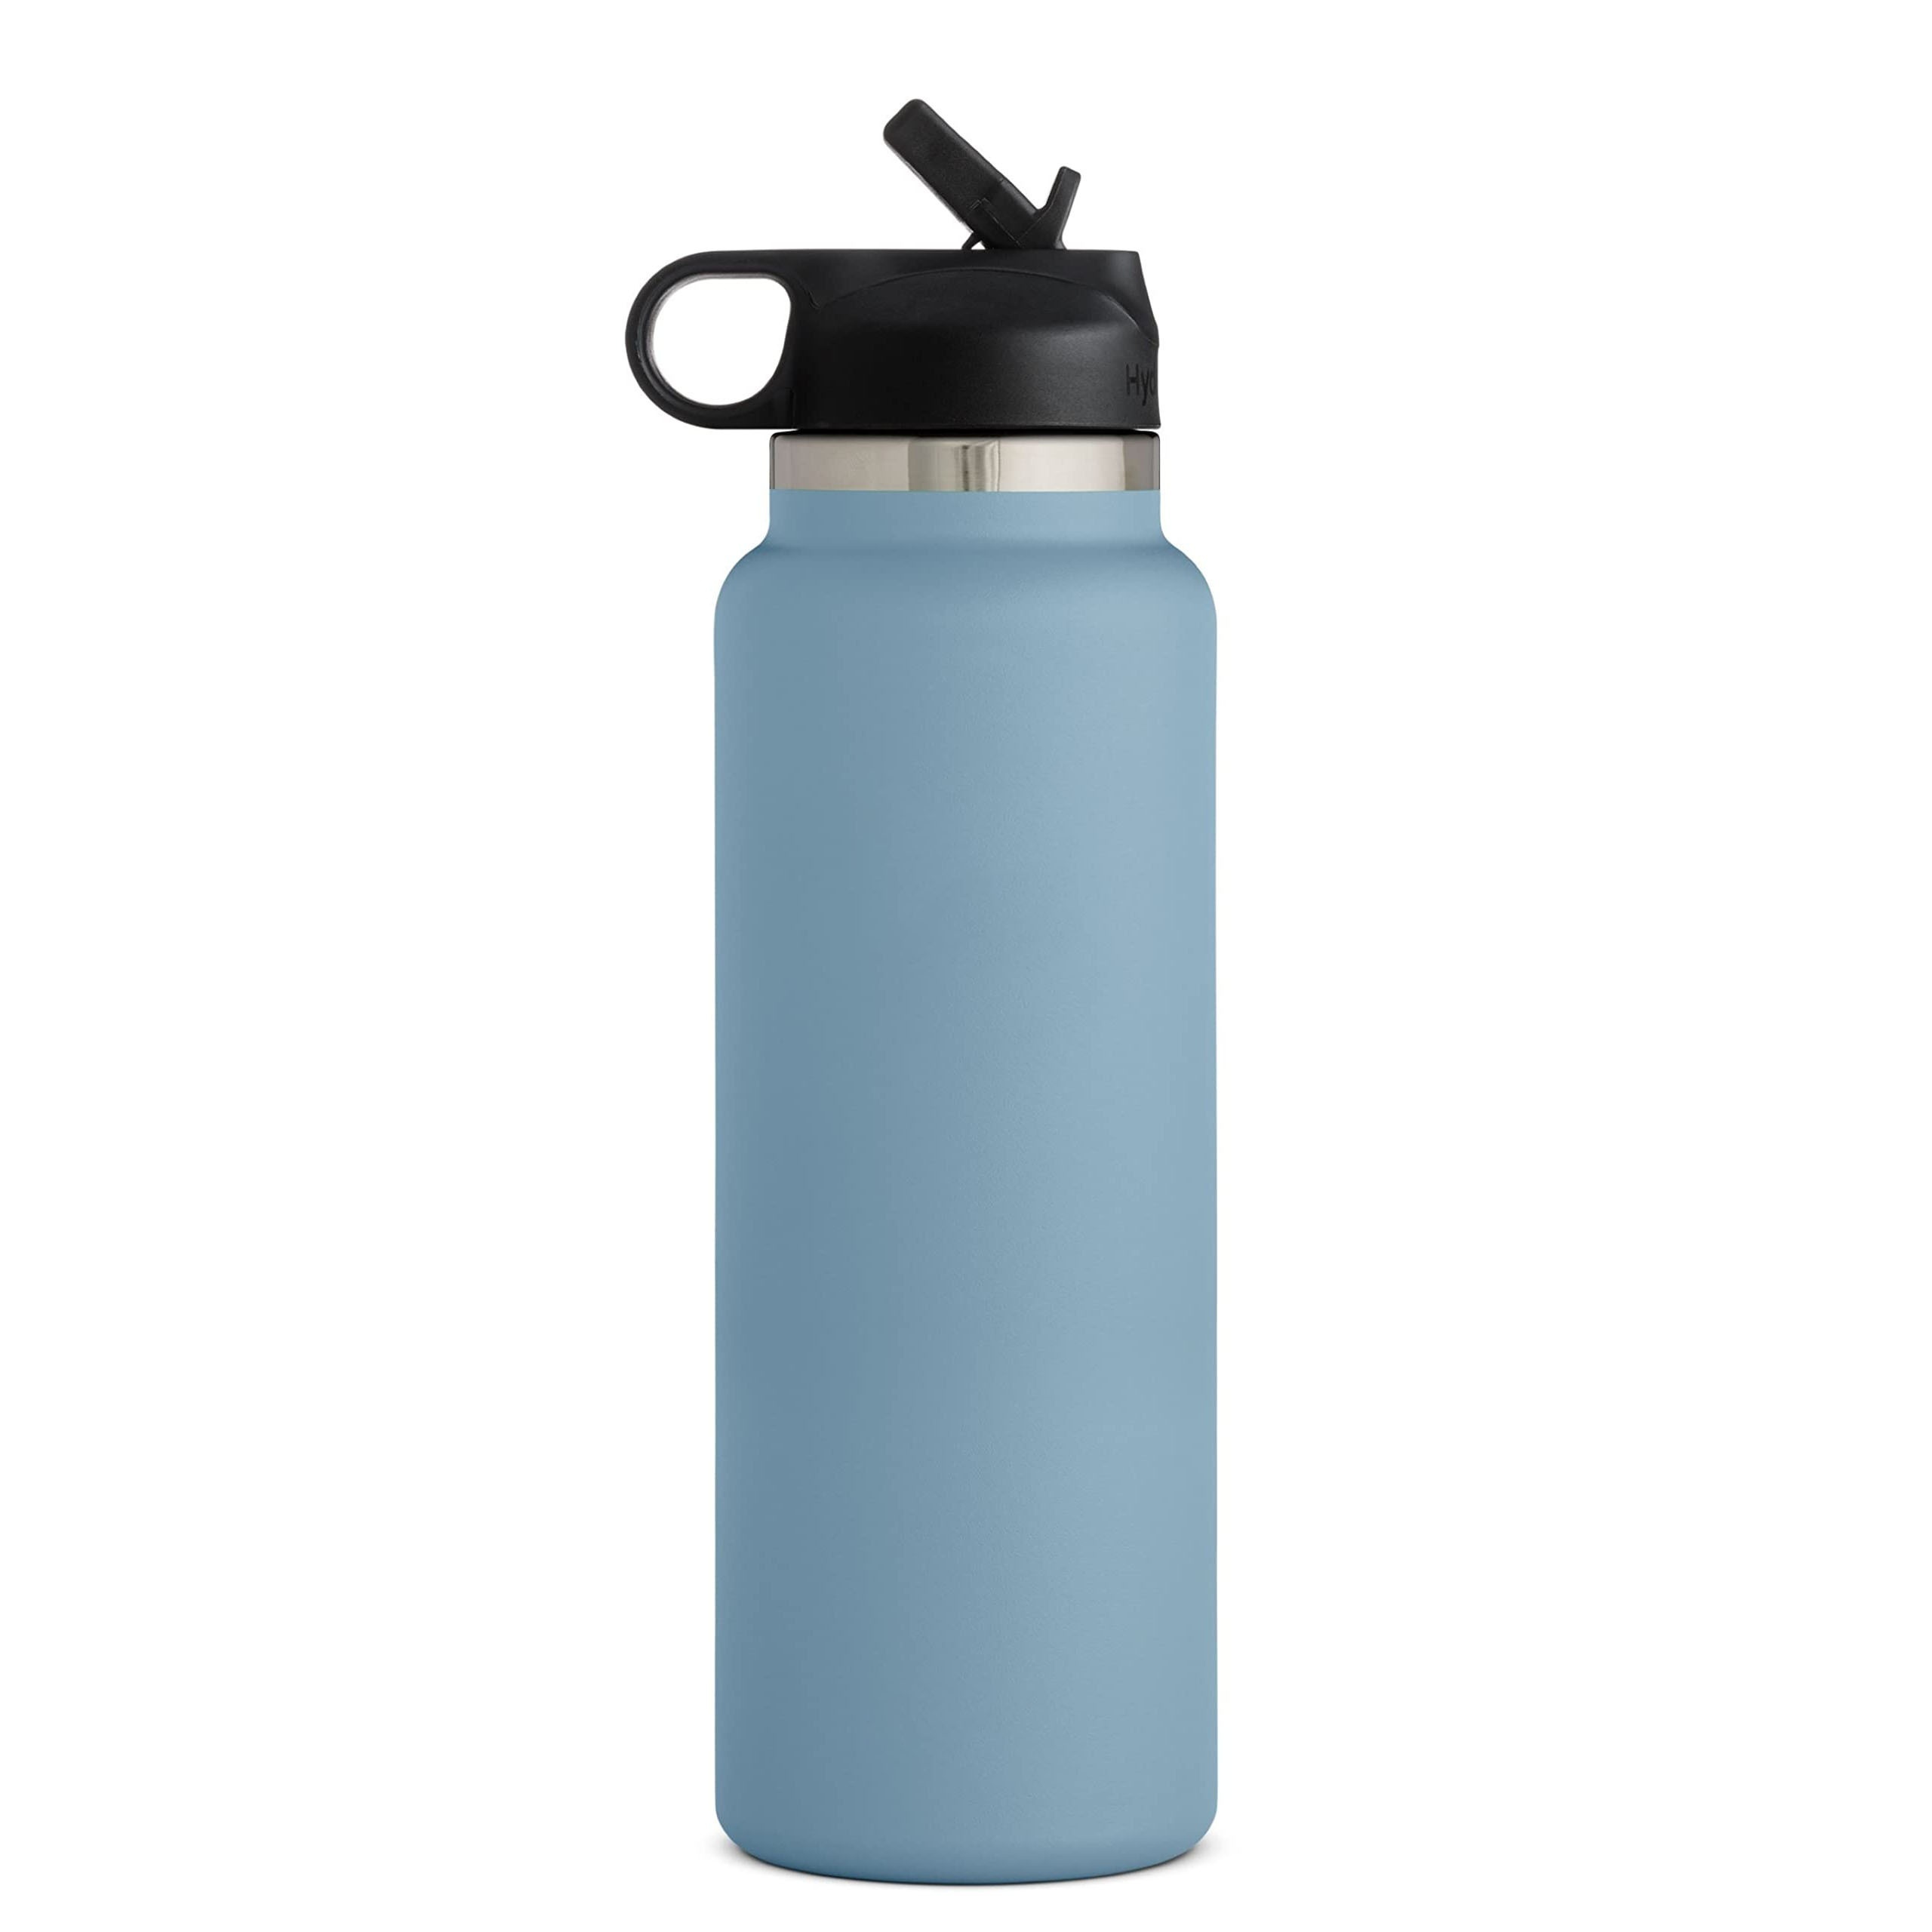 304 Stainless Steel Big Capacity Thermos Bottle 1L/2L /3L/ Outdoor